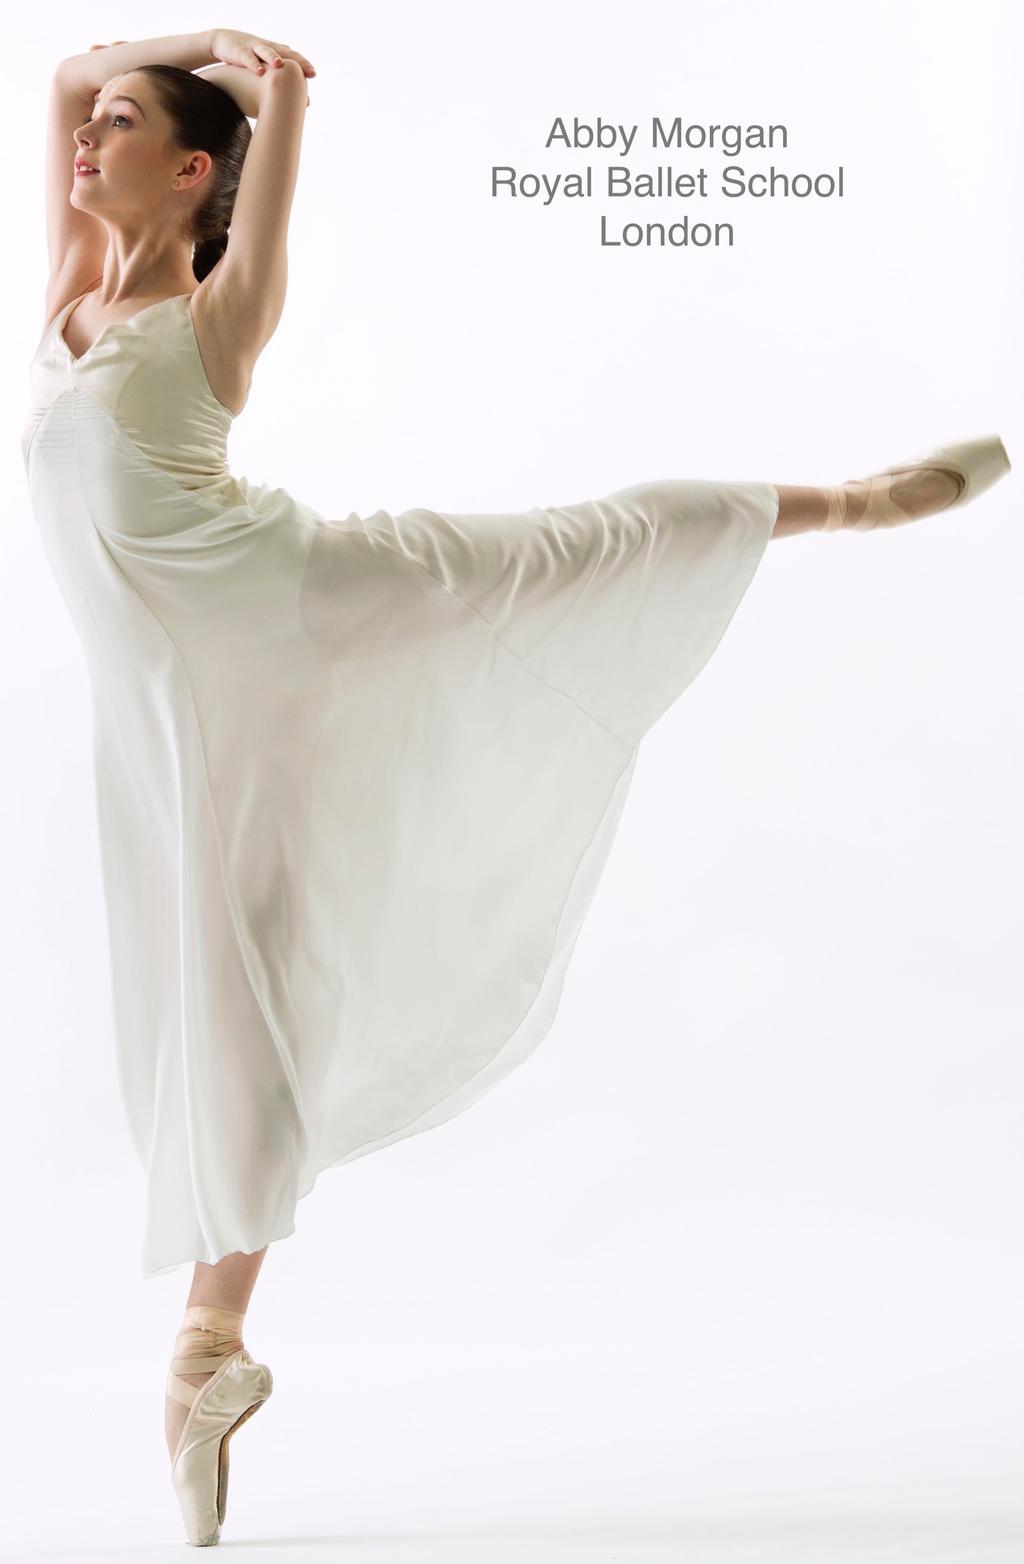 CCA has an international reputation as a school that consistently produces beautifully trained ballet dancers.